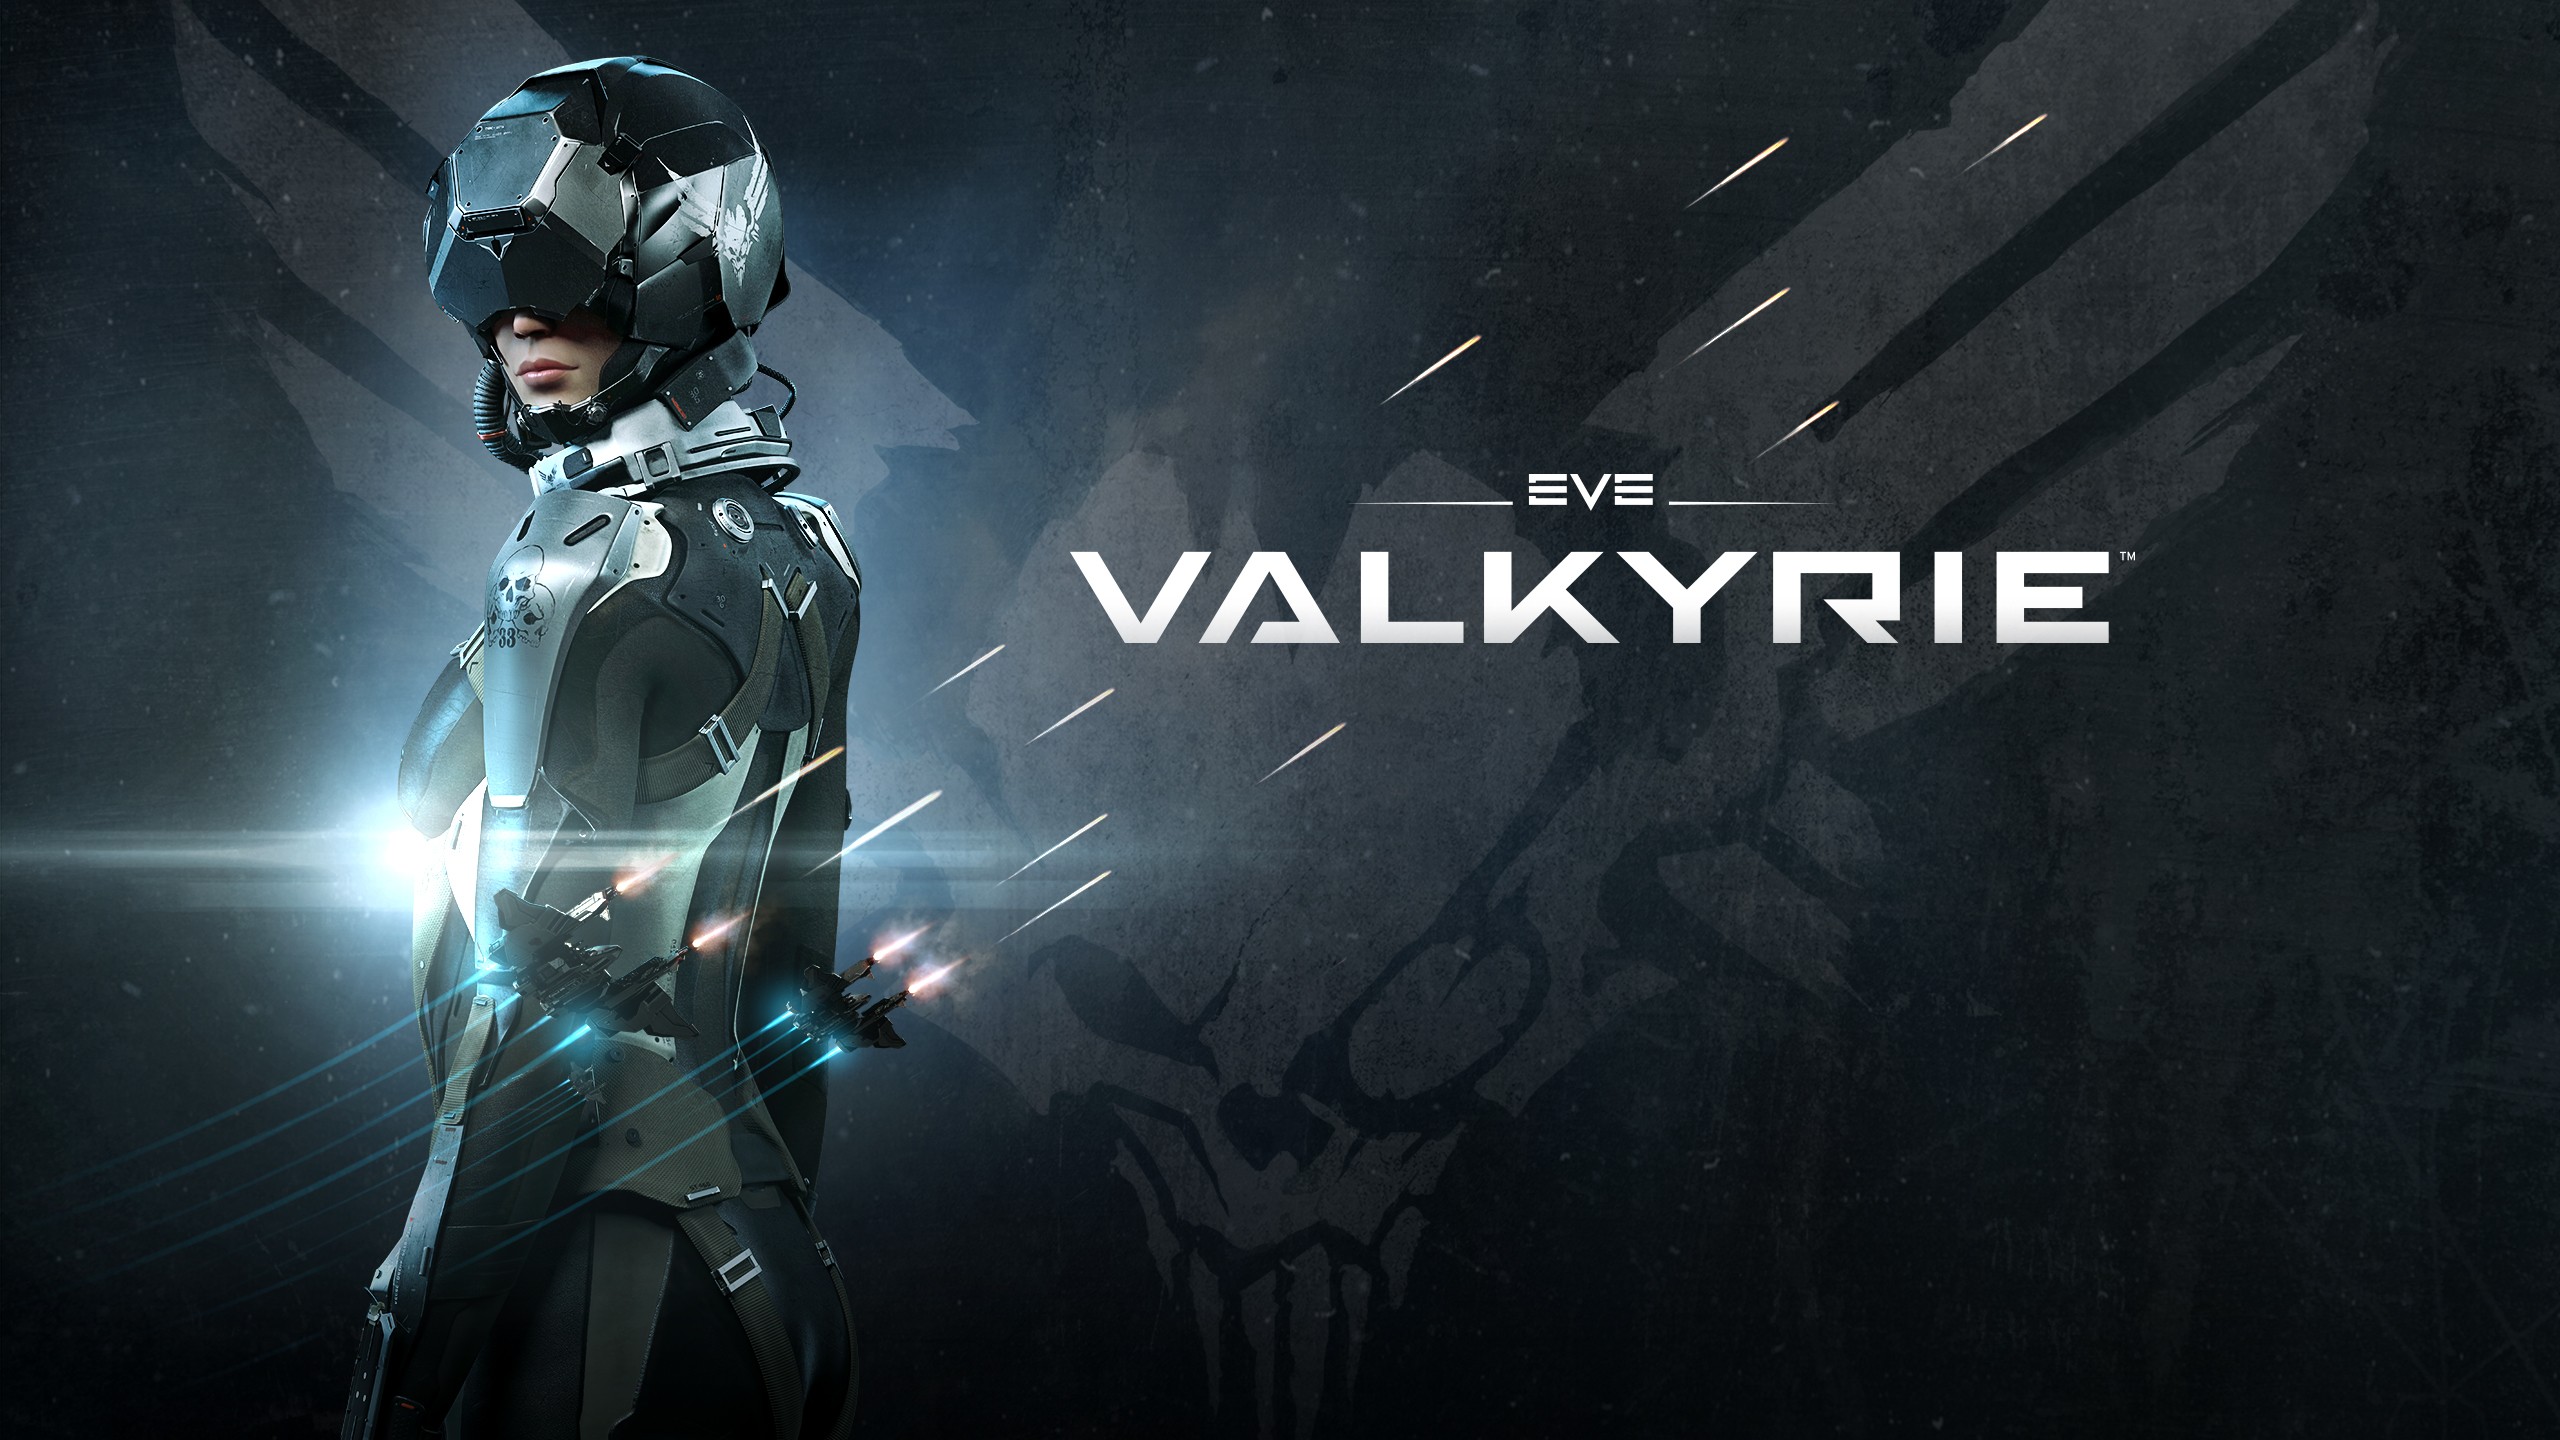 General 2560x1440 EVE Valkyrie EVE Online PC gaming virtual reality digital art